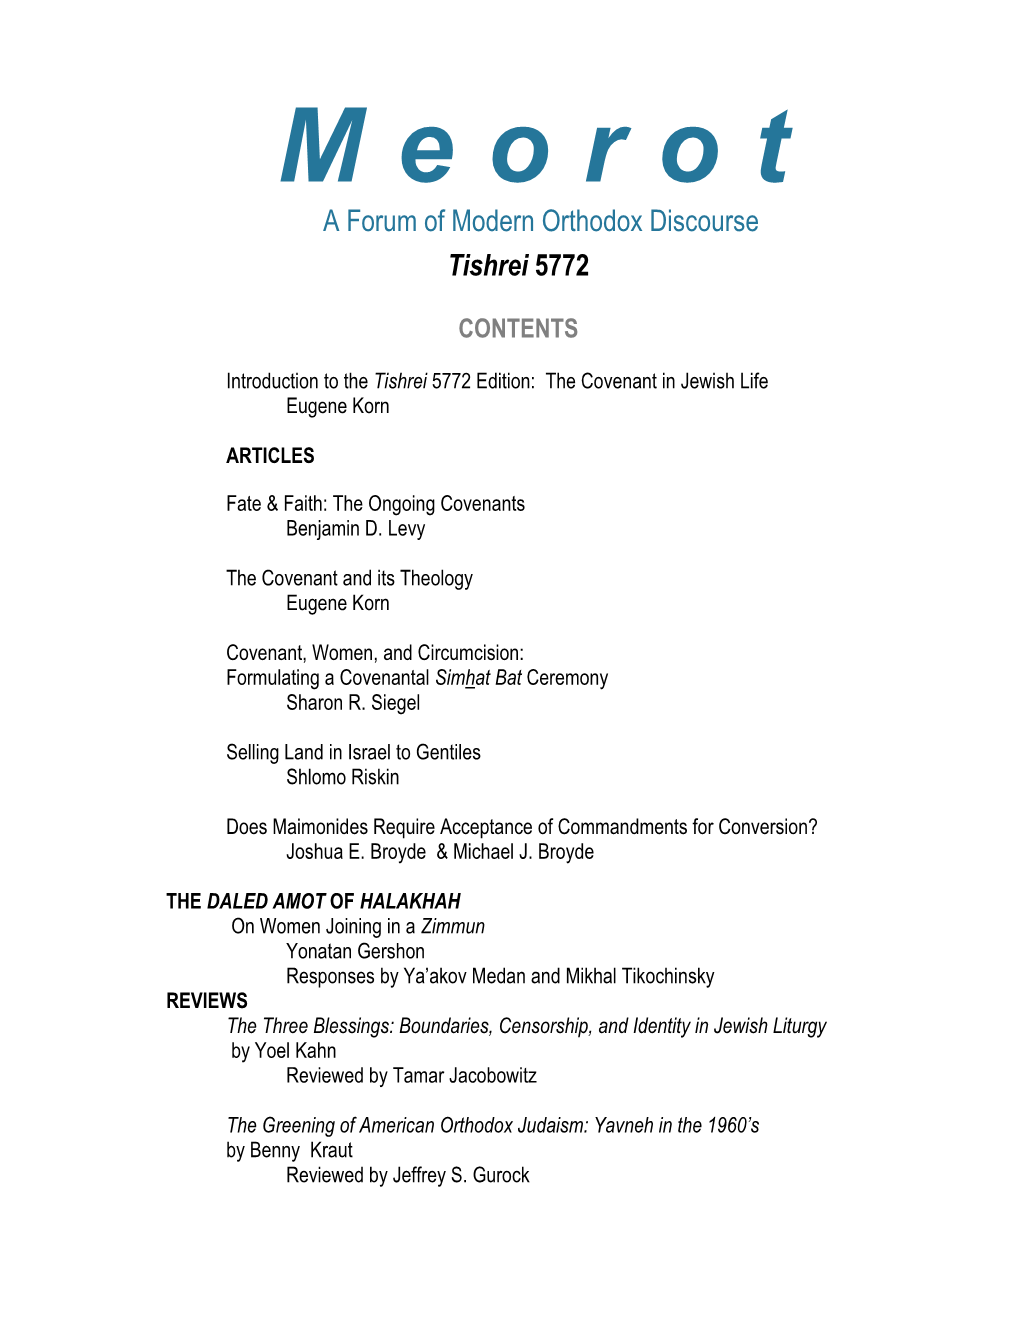 Meorot: a Forum of Modern Orthodox Discourse